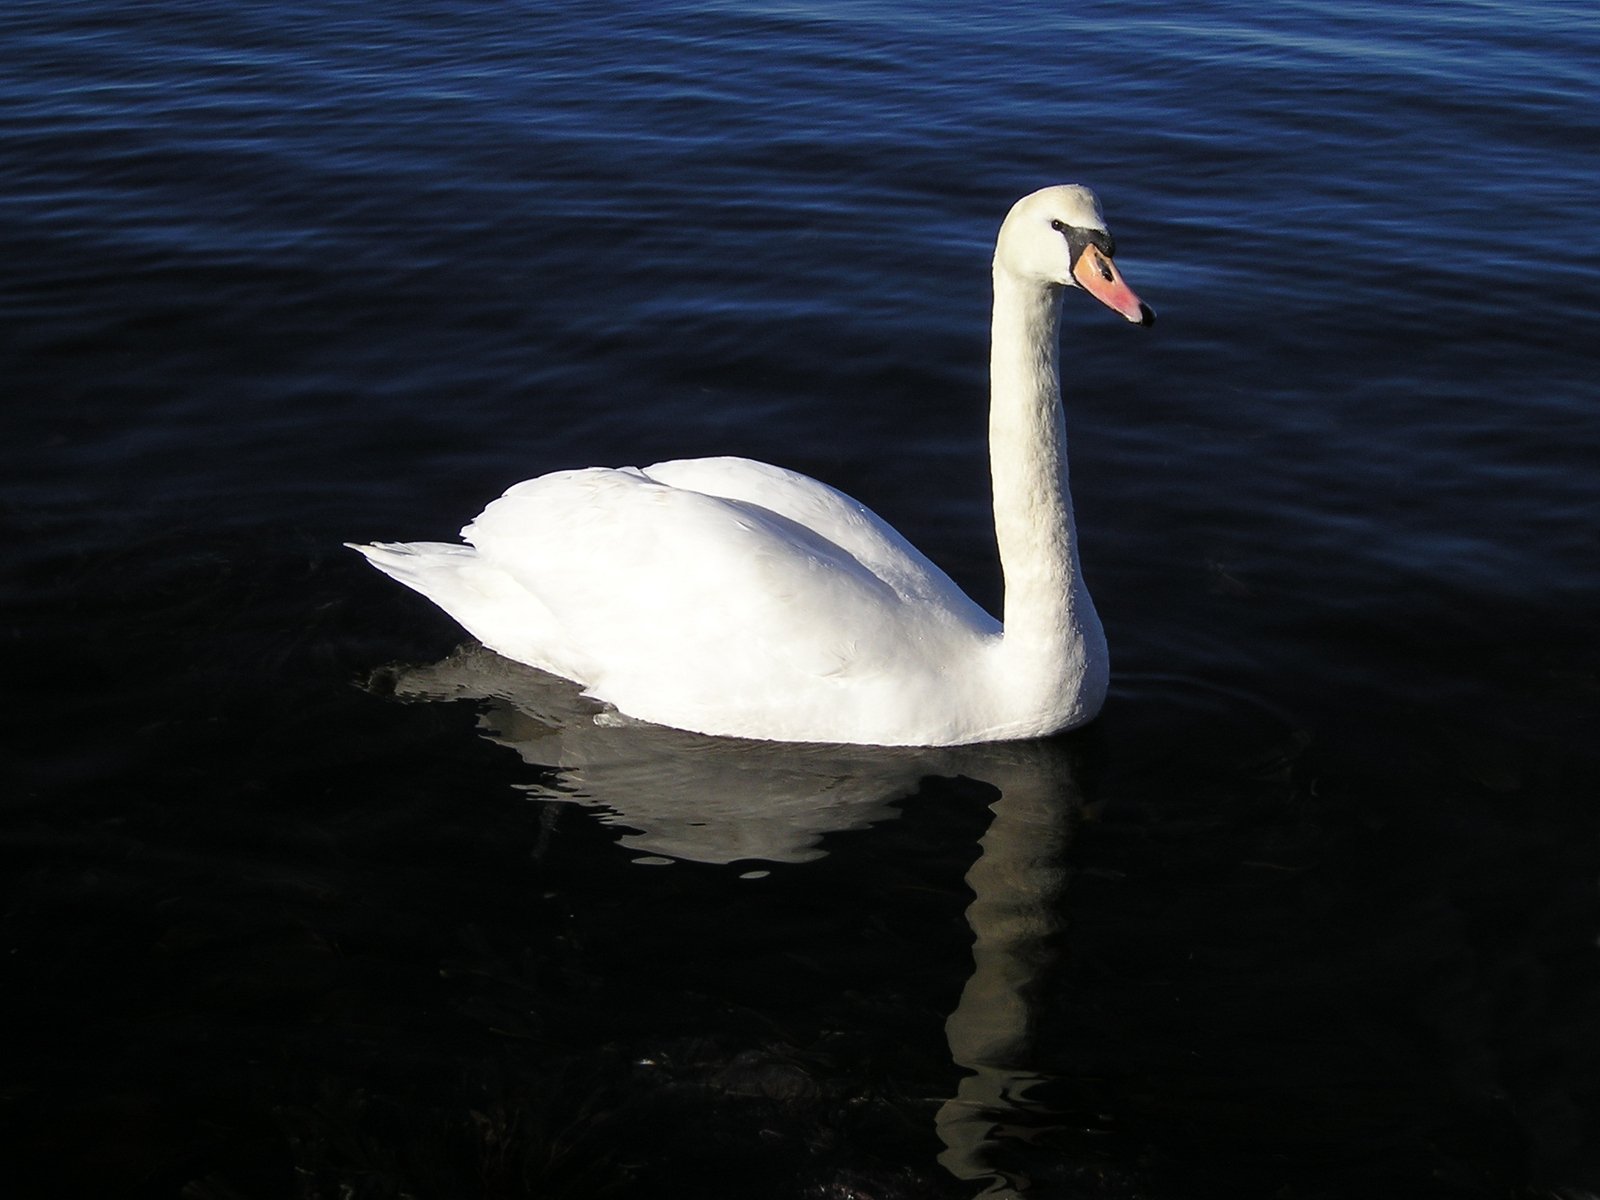 the swan is swimming across the water by itself